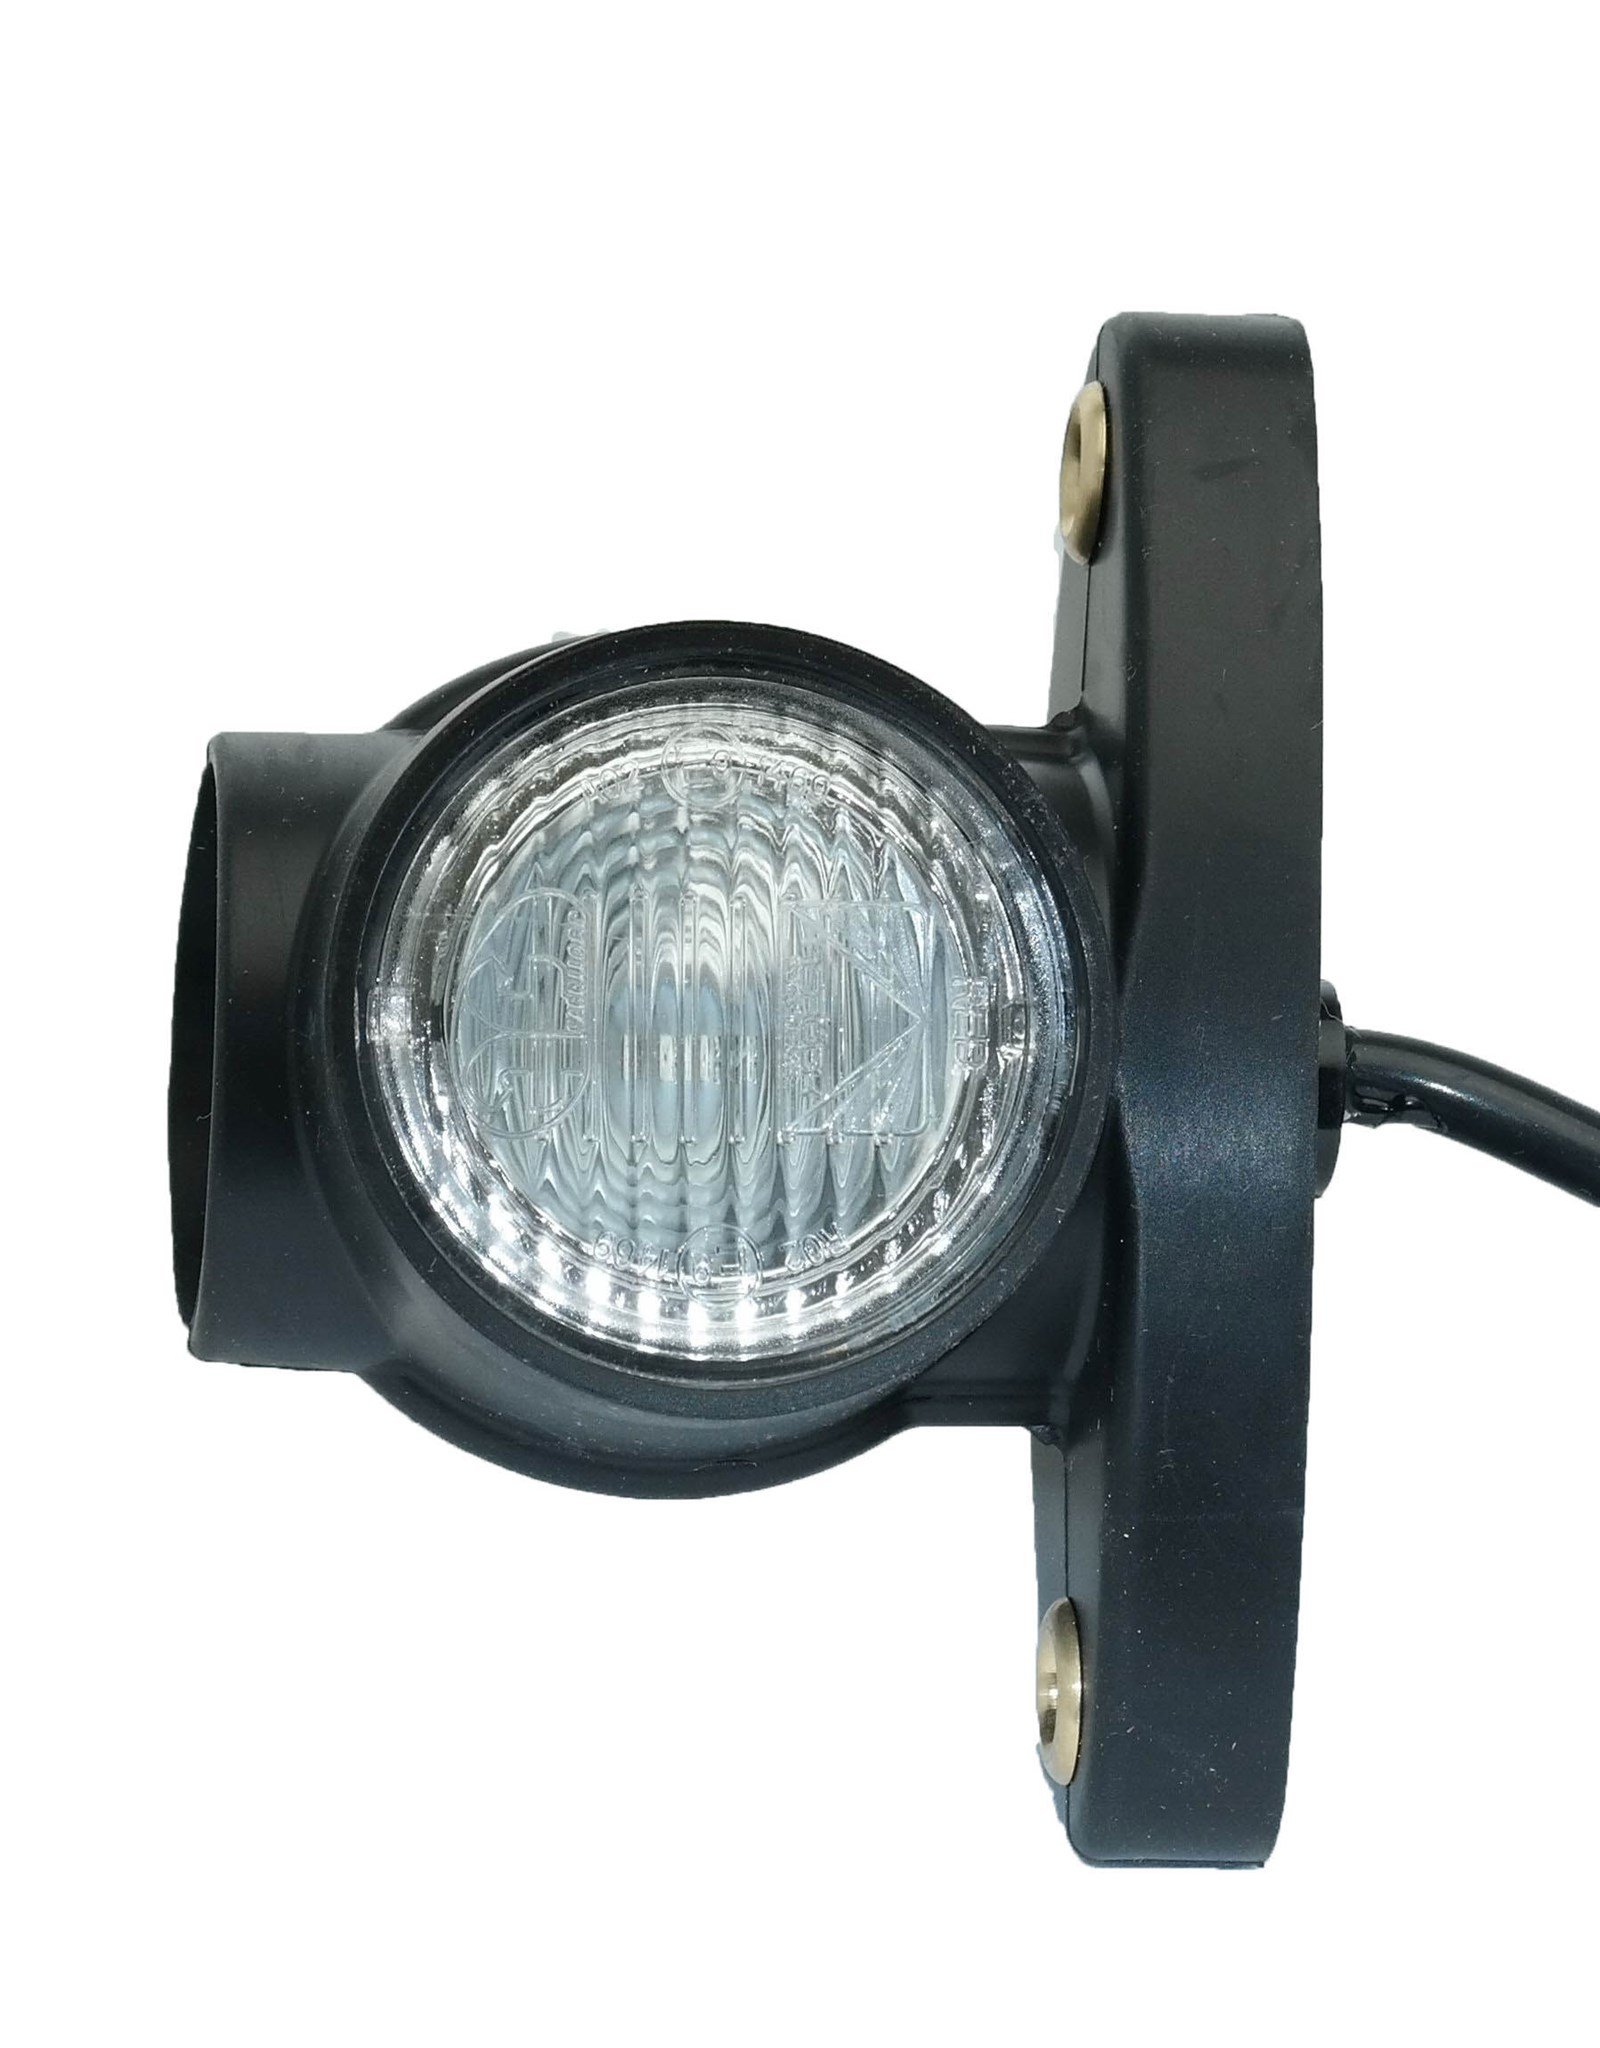 Immagine di Umrissleuchte  Aspöck Superpoint III LED Direkt ASS3 3pol. 250mm ro/we/or